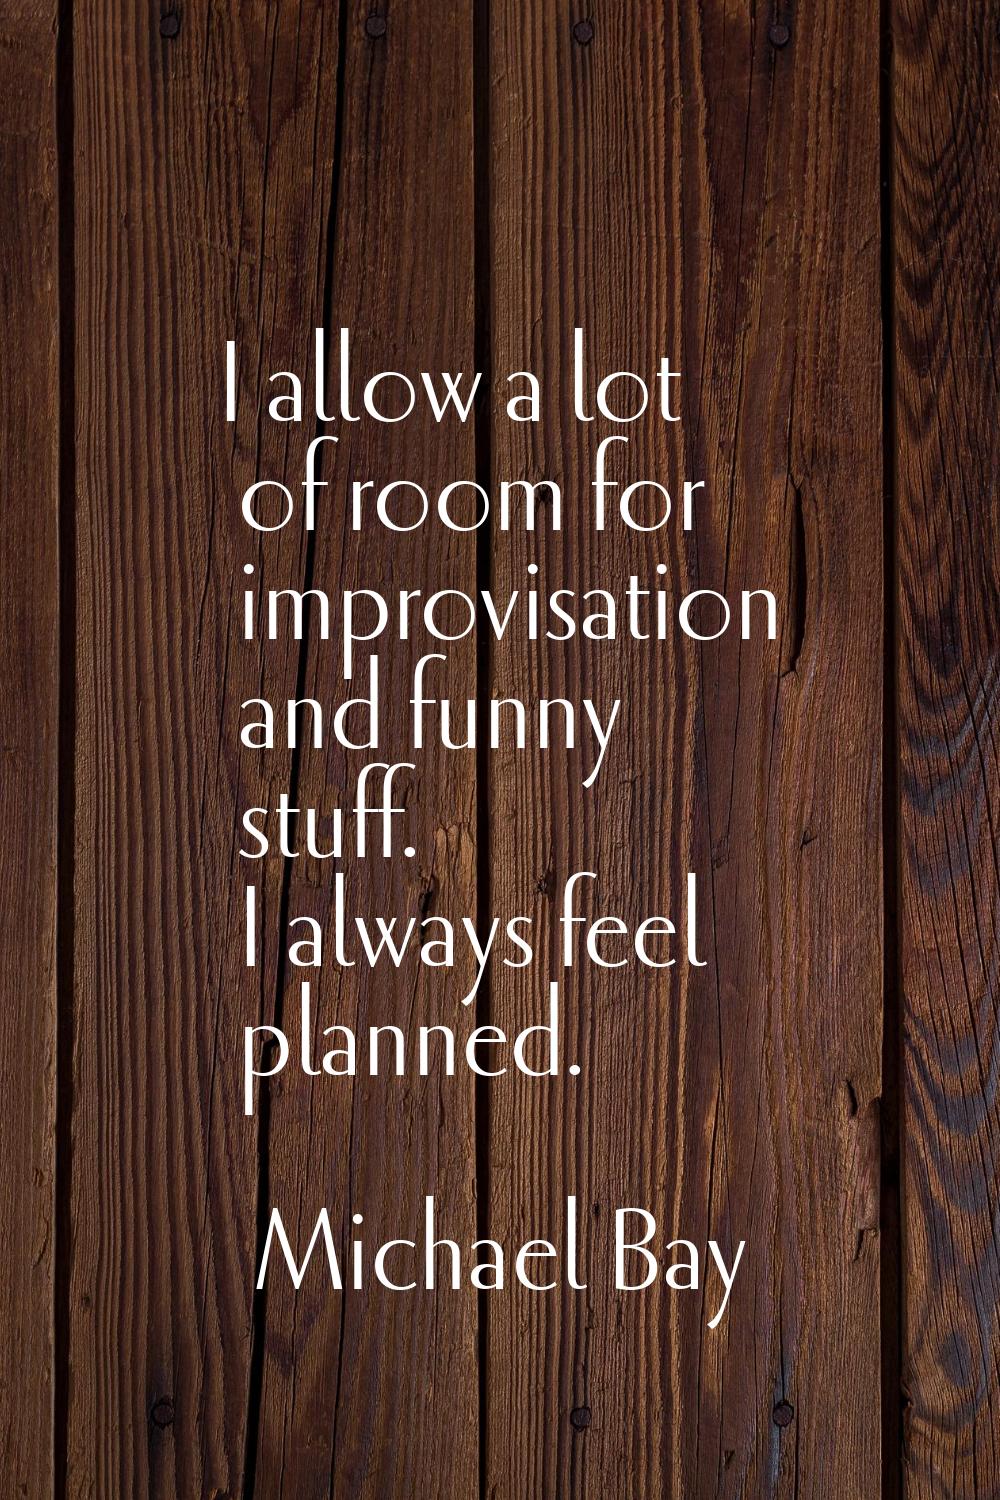 I allow a lot of room for improvisation and funny stuff. I always feel planned.